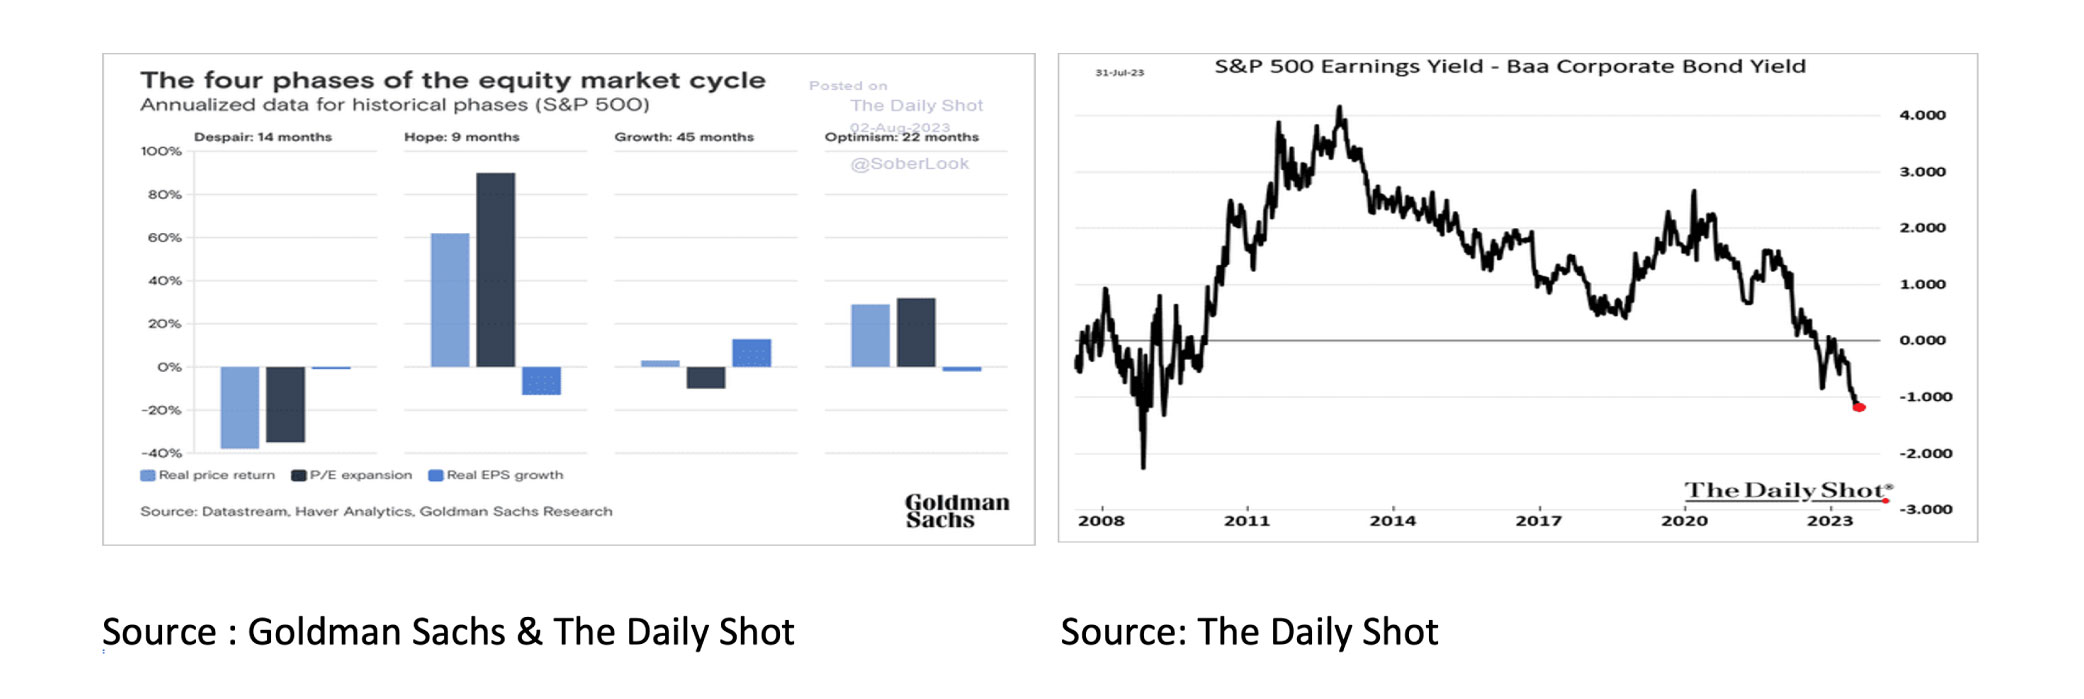 The four phases of the equity market cycle